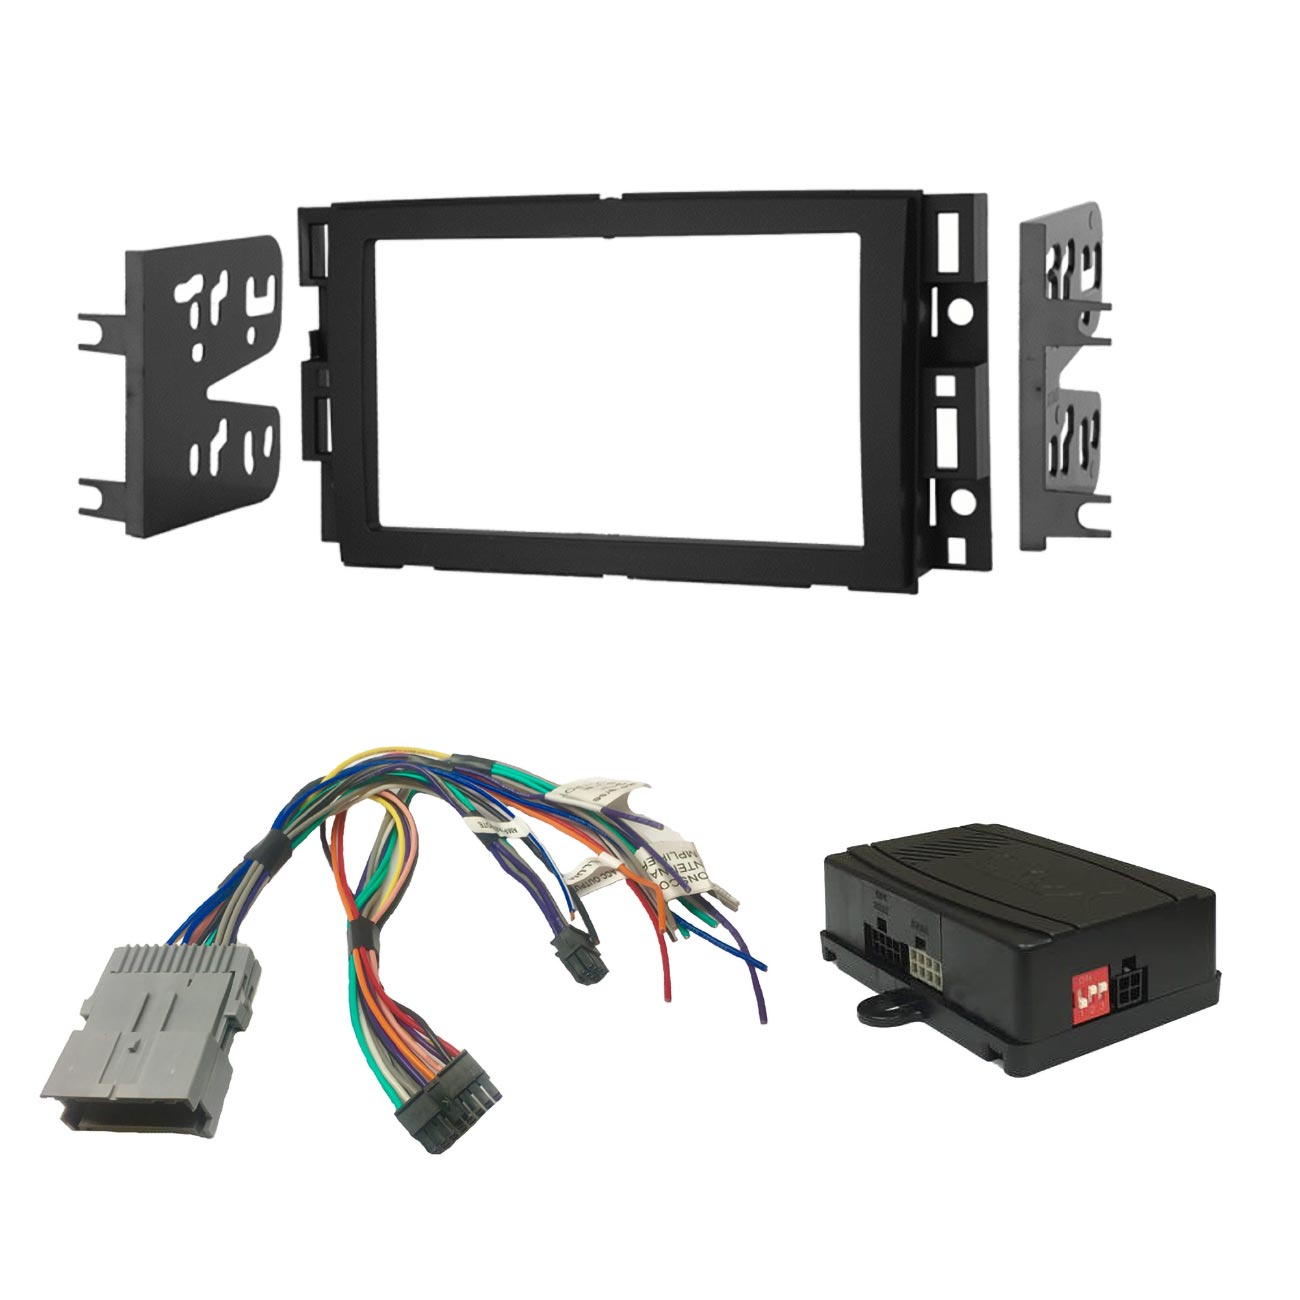 Crux Radio Replacement for GM Class II Vehicles (Single DIN Dash Kit Included)